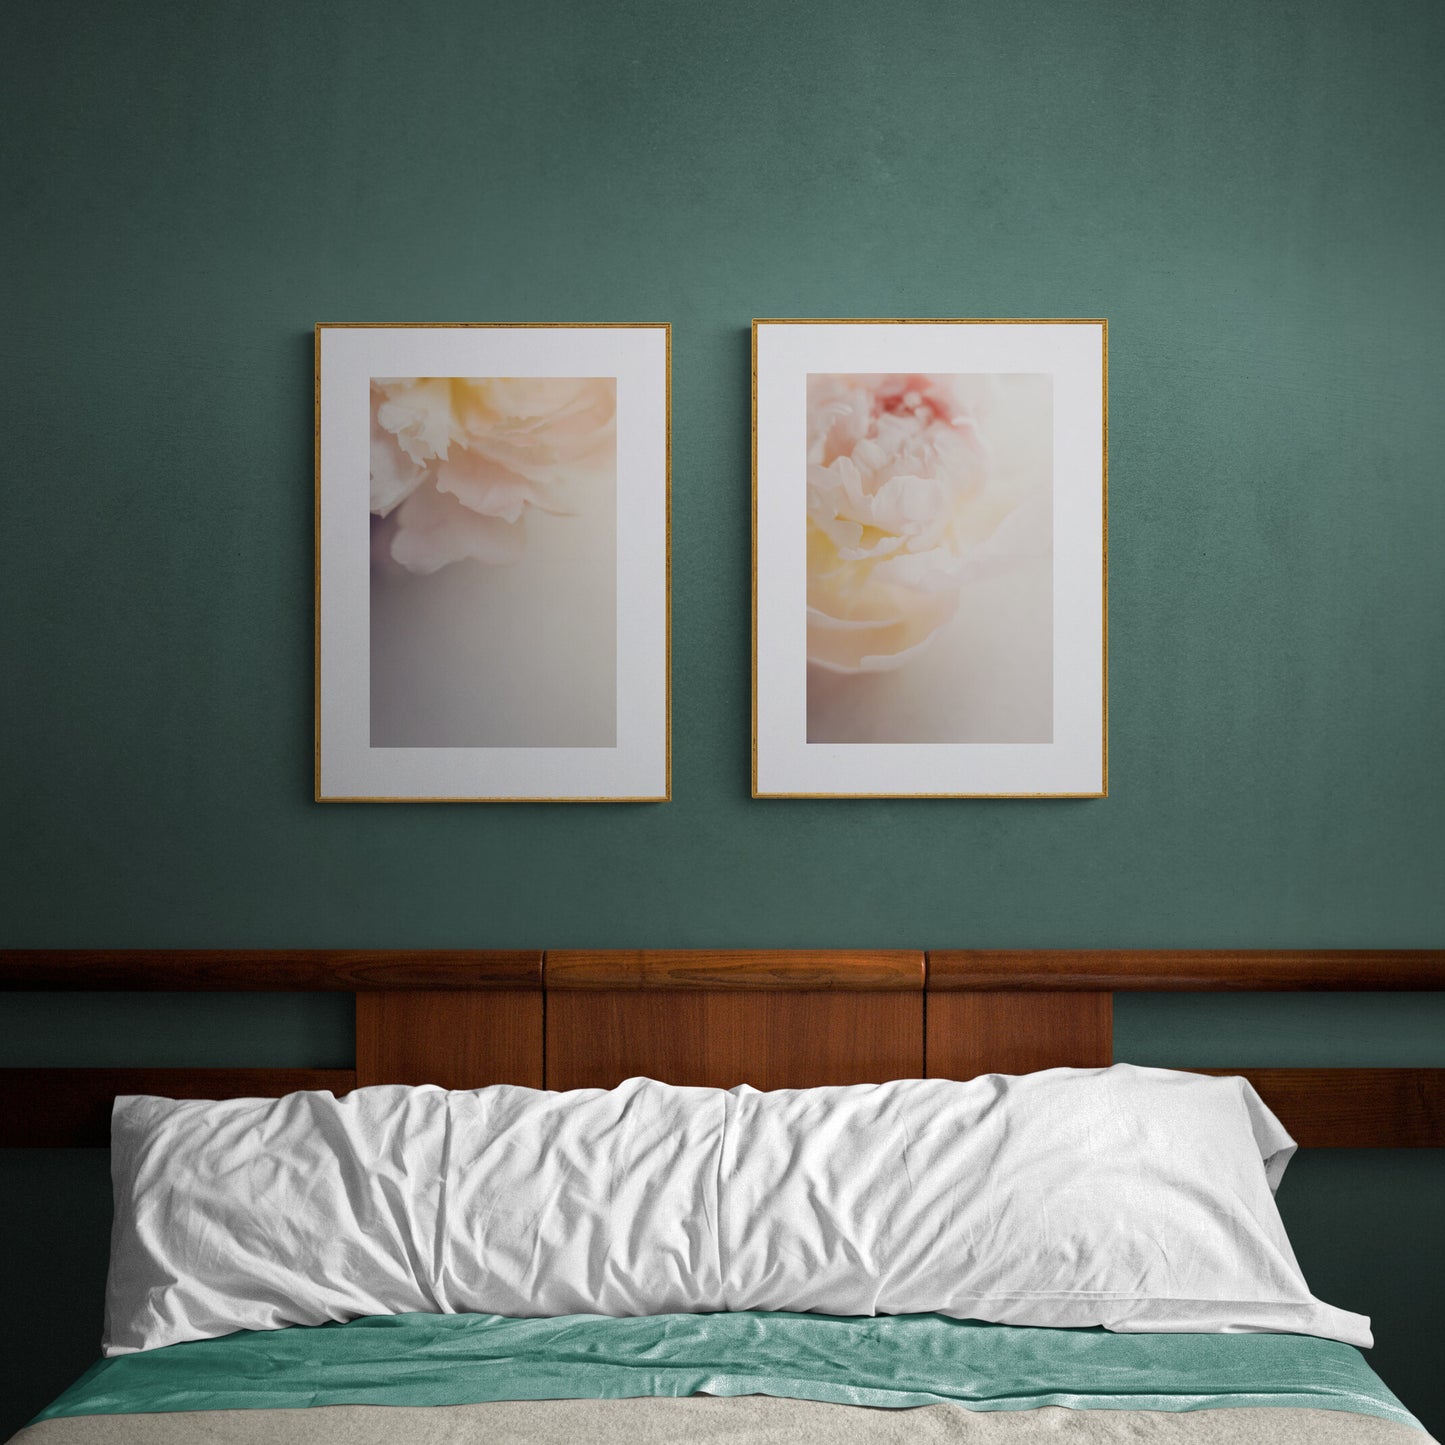 Two pink peonies photograph prints as wall art in a bedroom